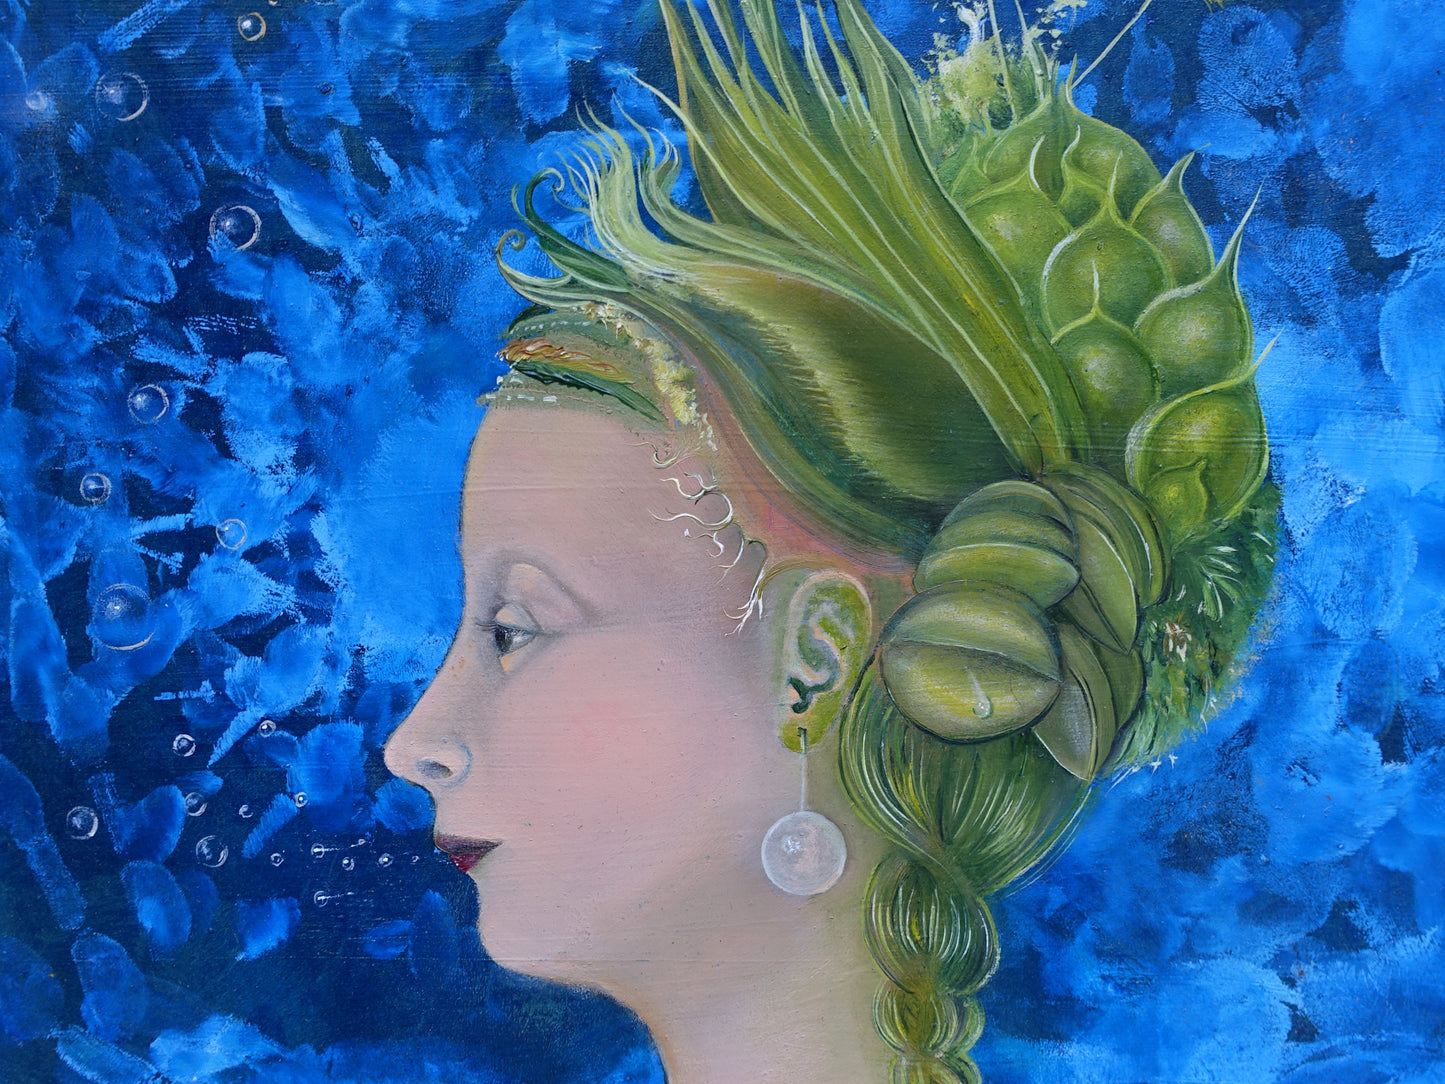 Woman with Plants on her Mind